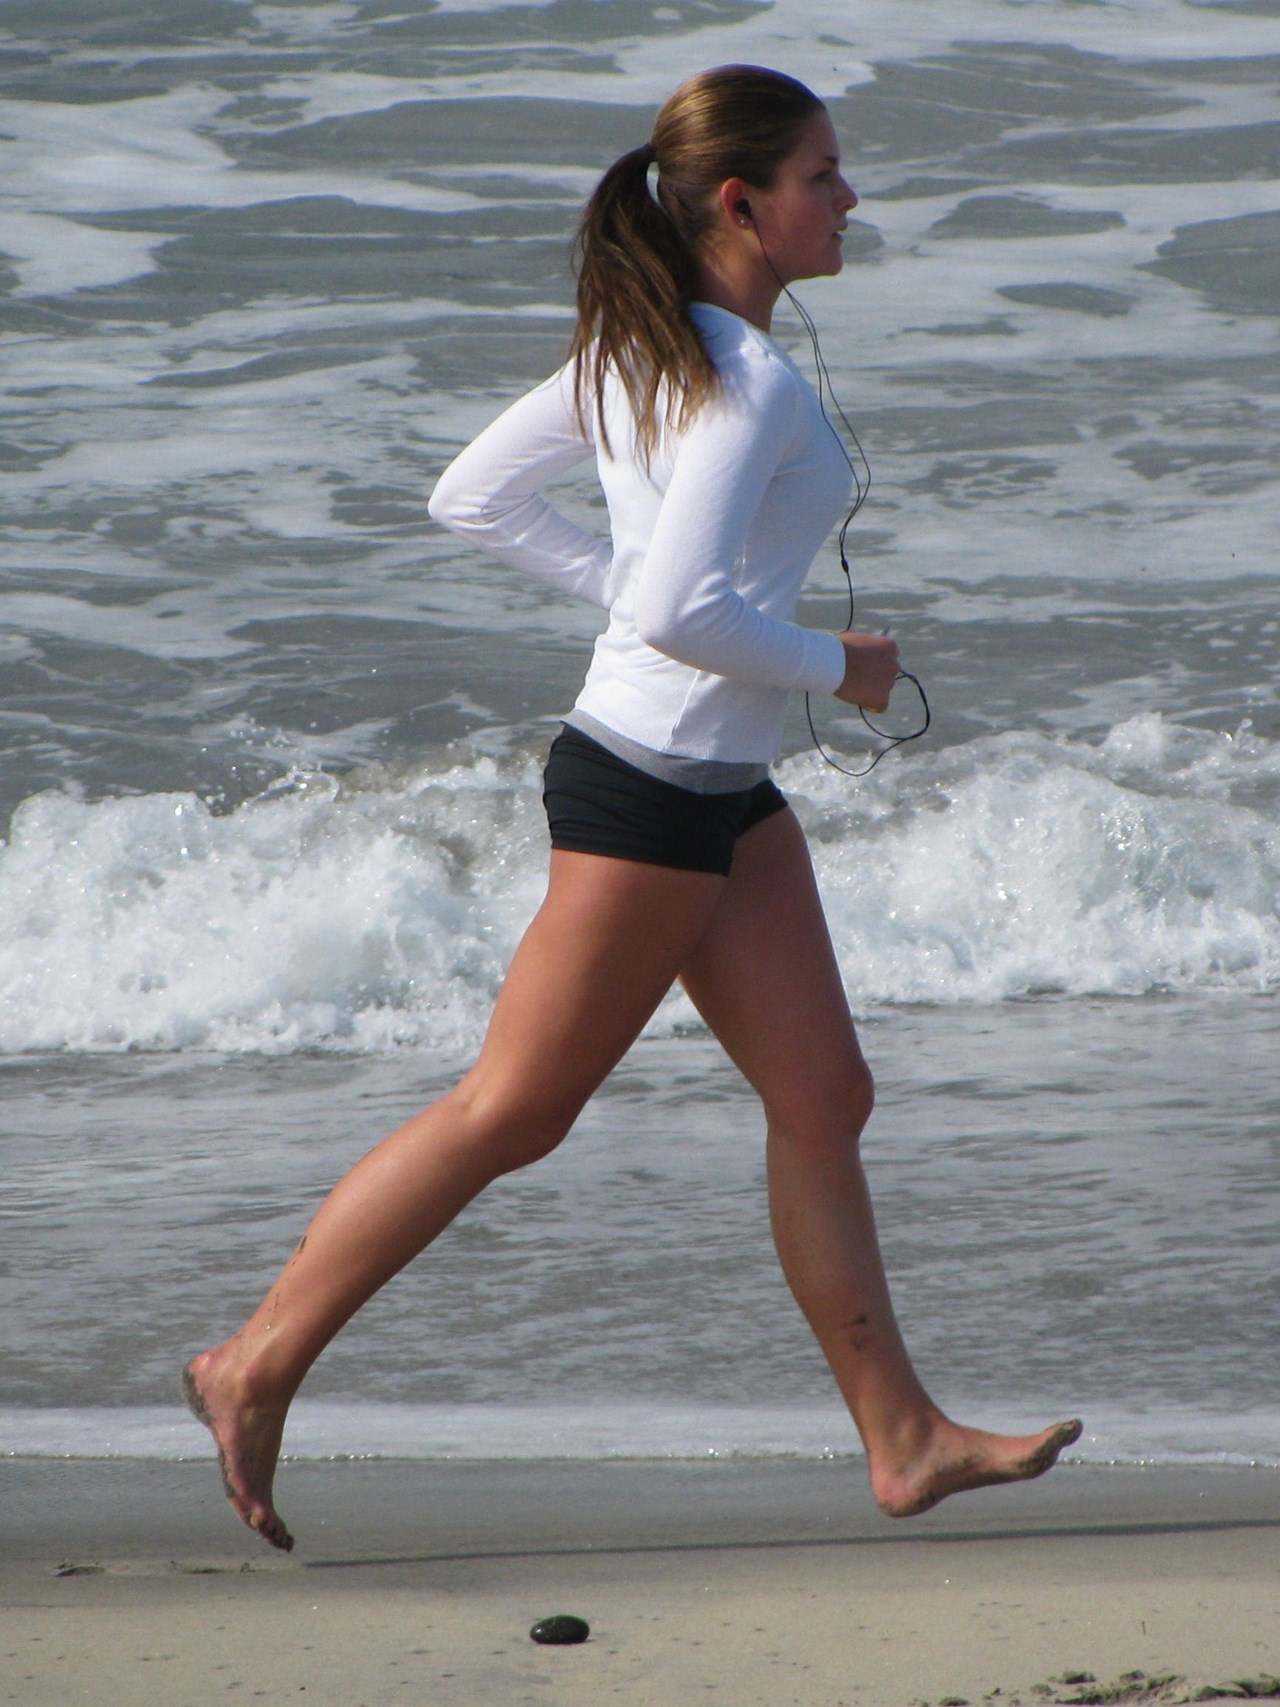 Who is and isn't suited to barefoot running? And if I want to try